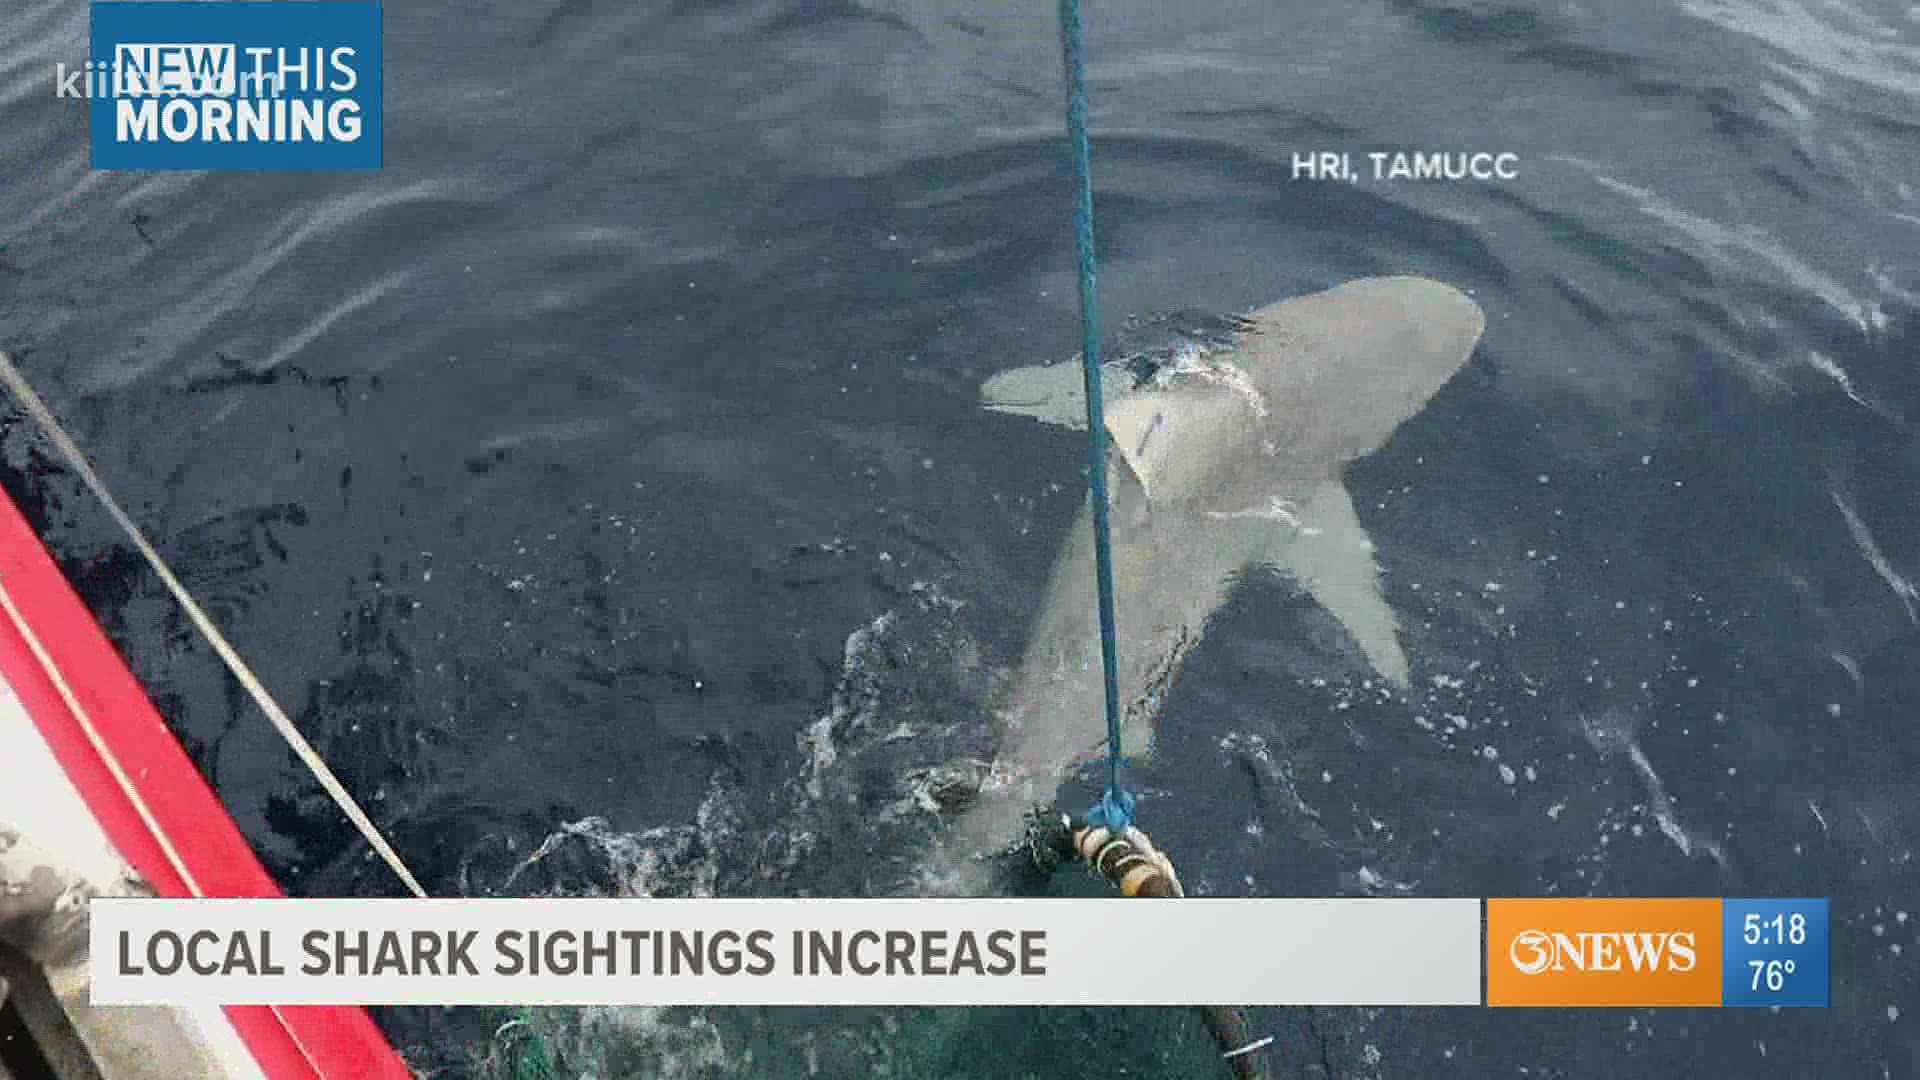 Chances are you have seen a shark in the area lately, either in person or on social media.